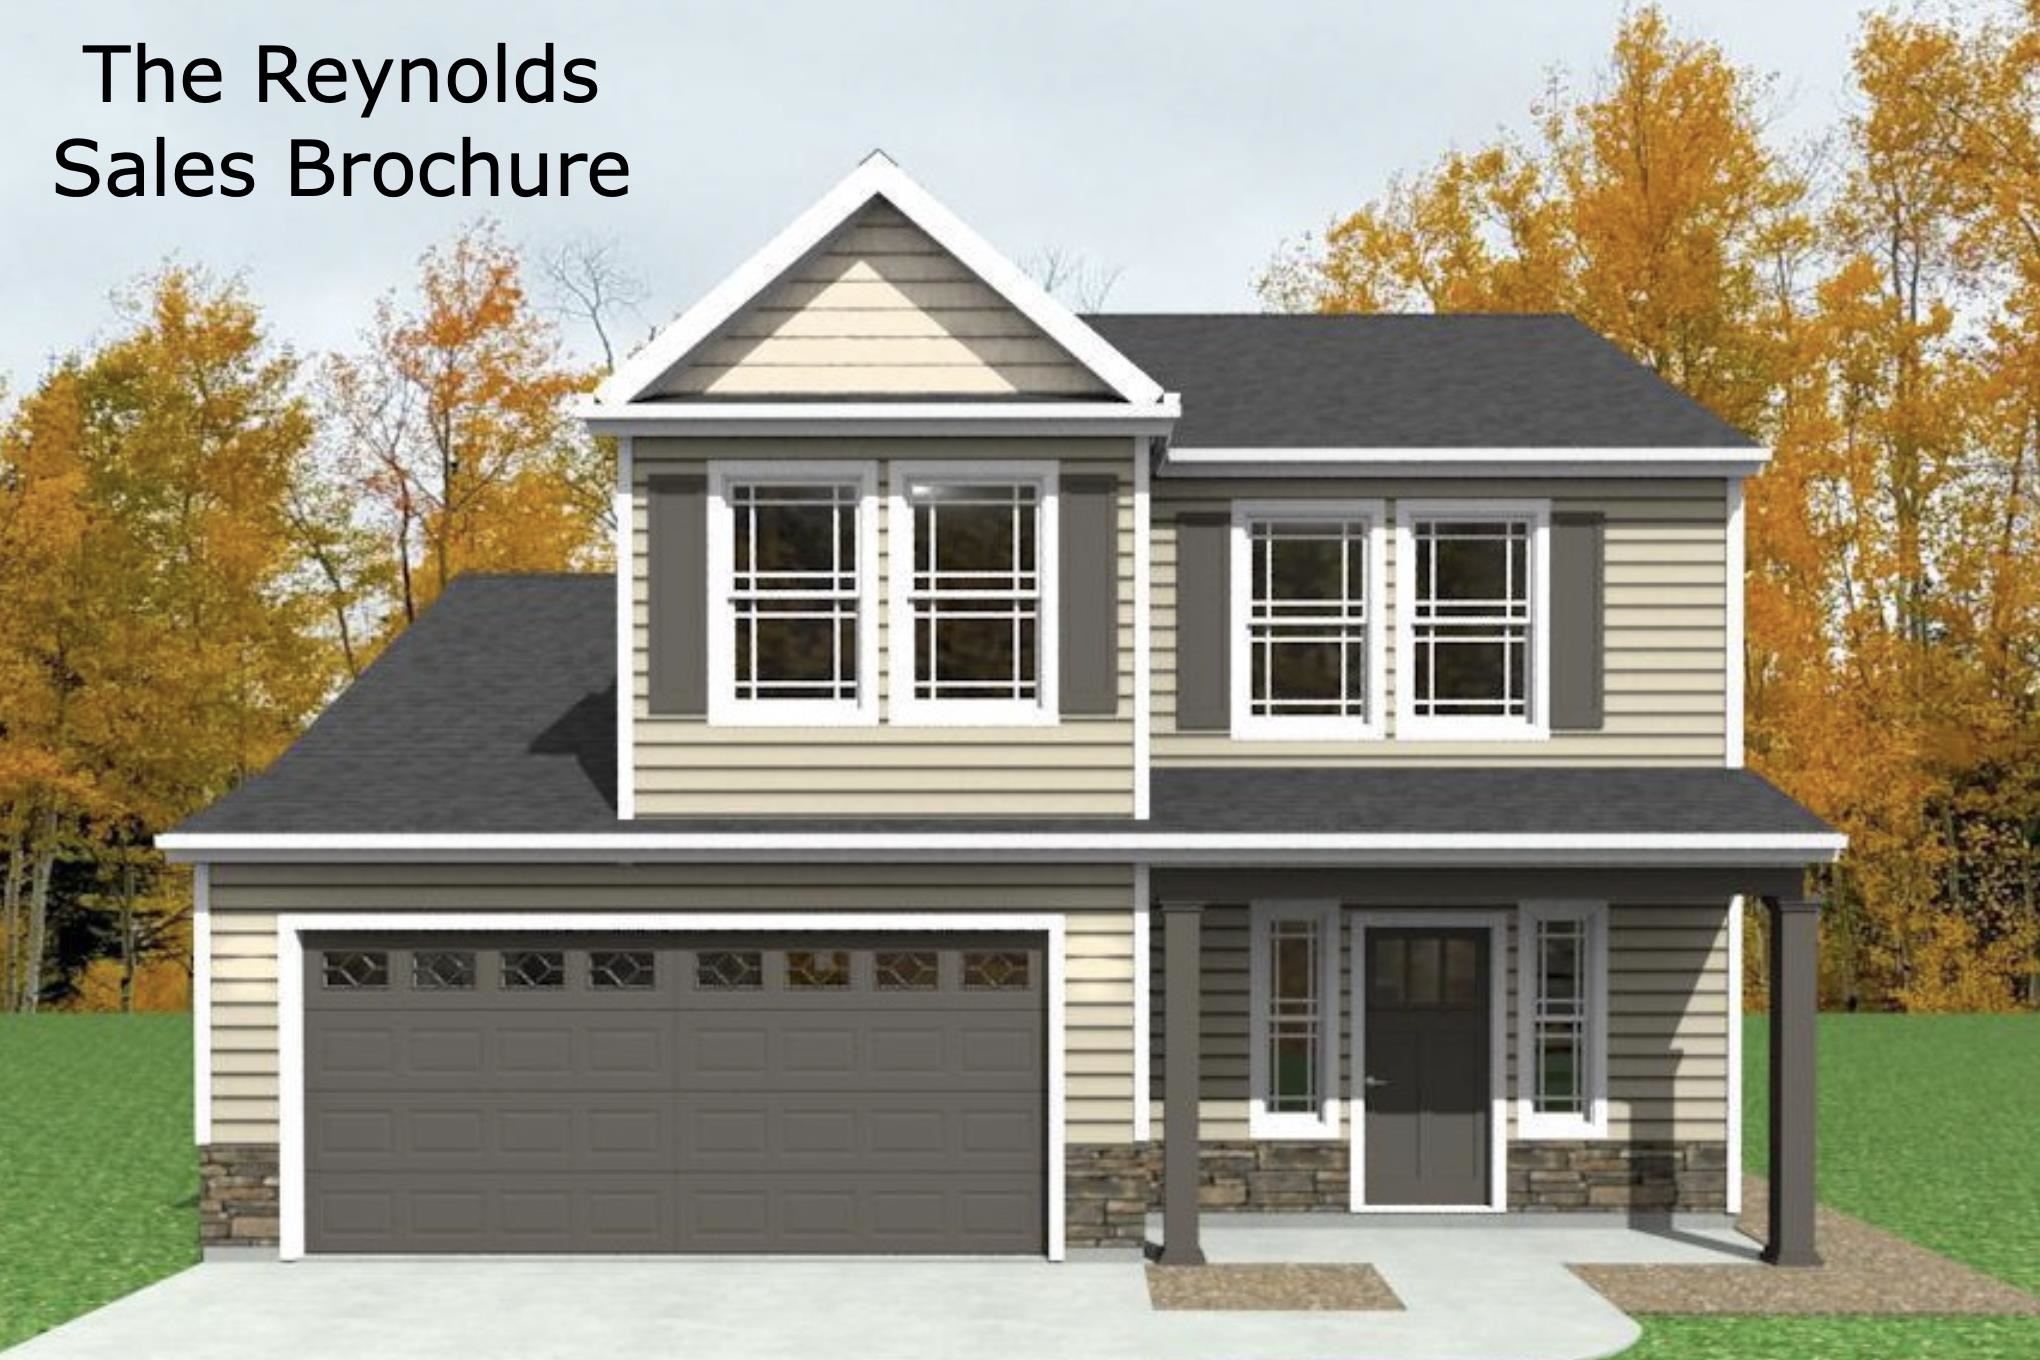 Reynolds plan! This 2 story 3br/2.5ba home features a gas fireplace, granite counter tops, sun room and much more. Steuer Place is a new community with 100% financing available! This home is a must-see!  Preferred Lender/Attorney Closing Costs Incentive Offered!  1/2 acre Lot.